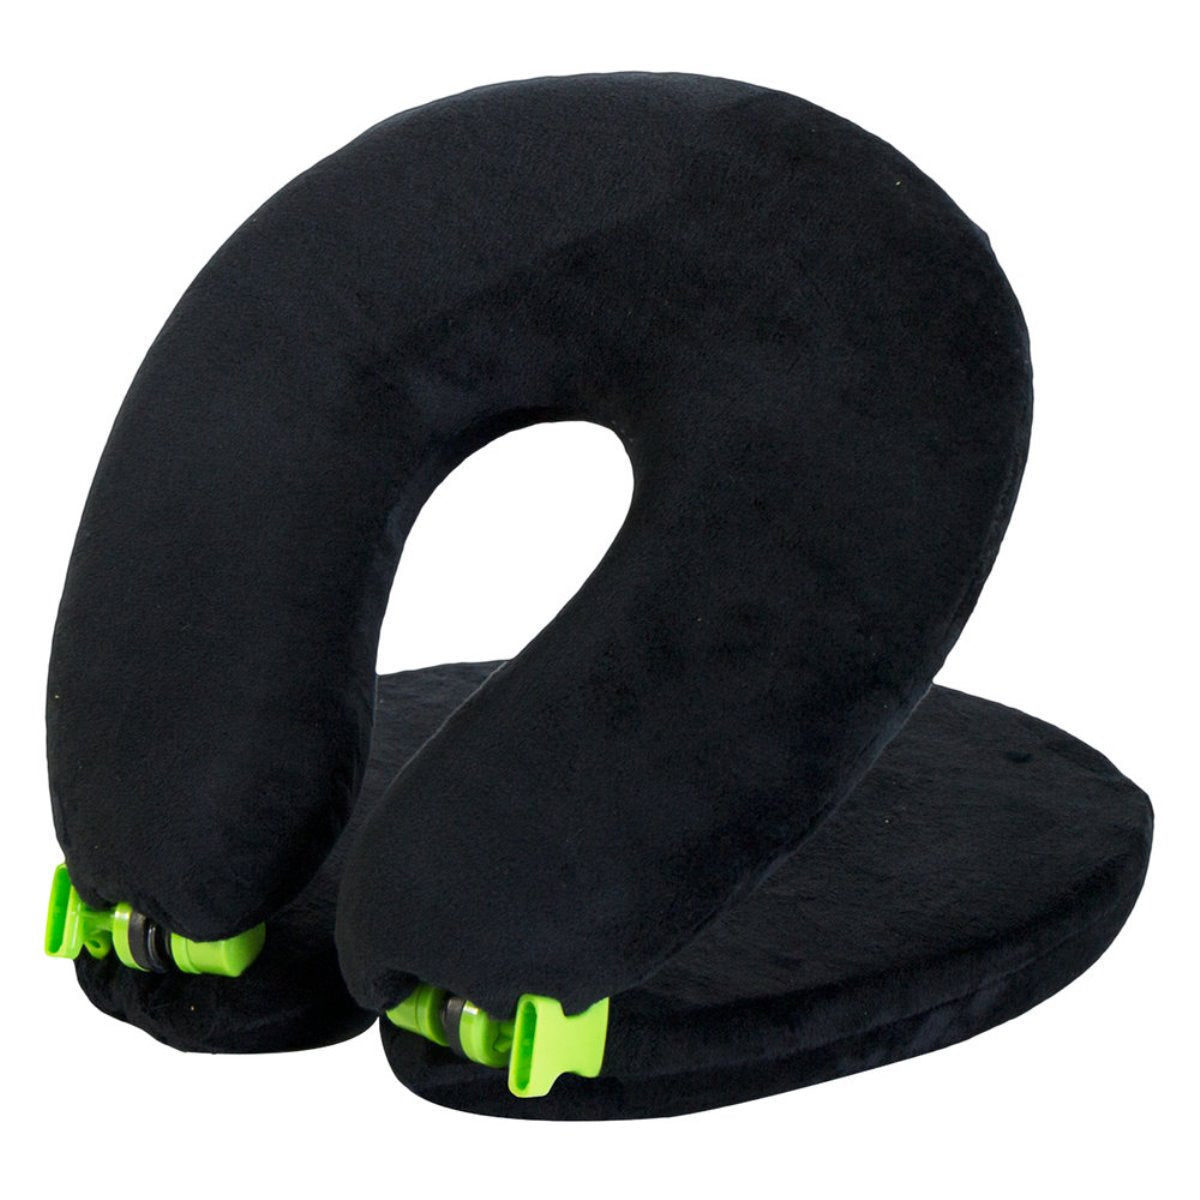 FaceCradle Travel Pillow with 5 modes